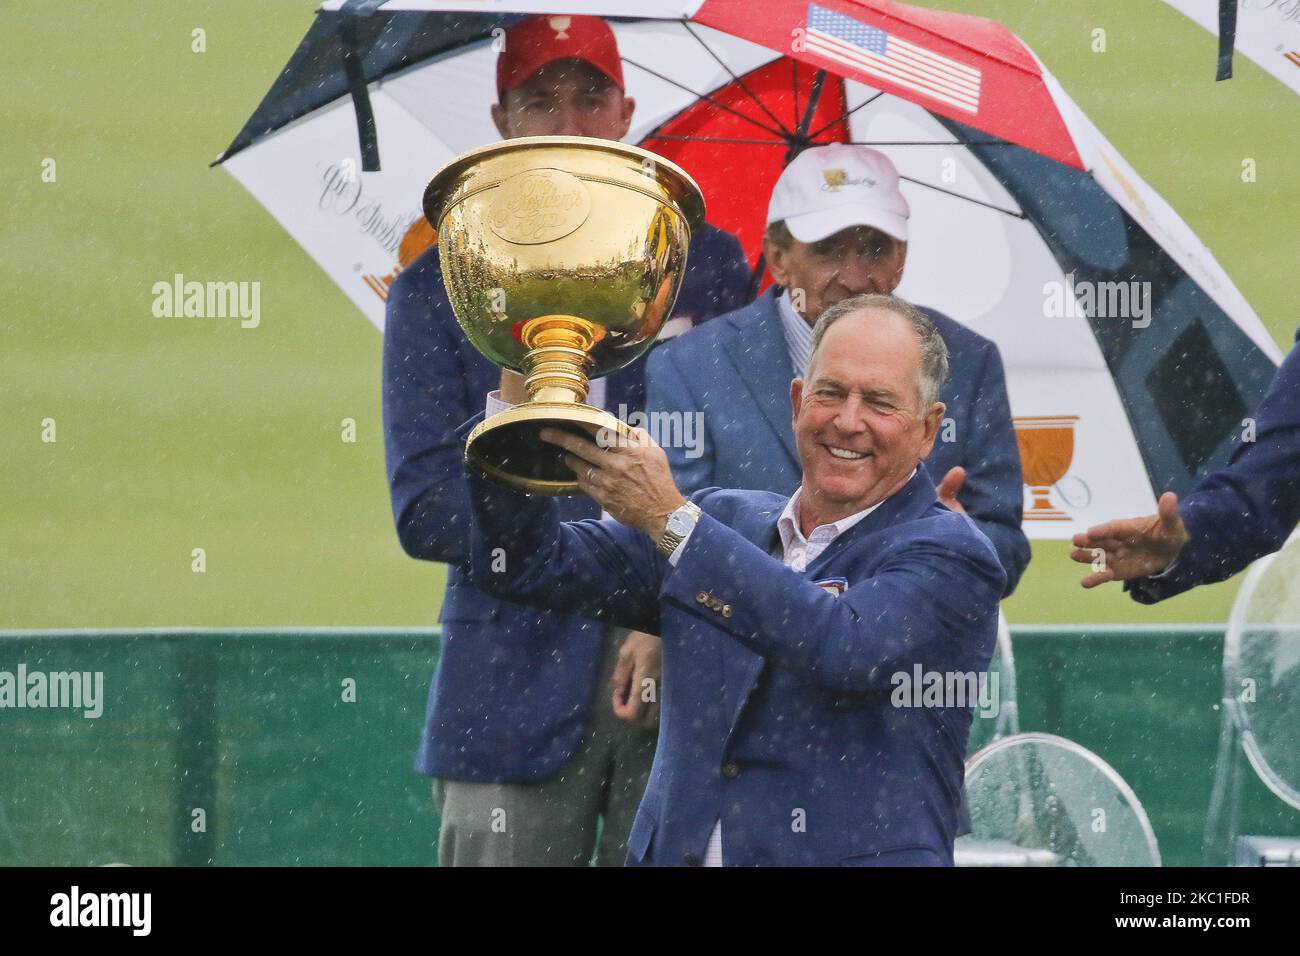 United States Team Captain Jay Haas hold cup trophy with wins ceremony on the podium during the PGA Tour President Cup Single Match at Jack Nicklaus GC in Incheon, South Korea on